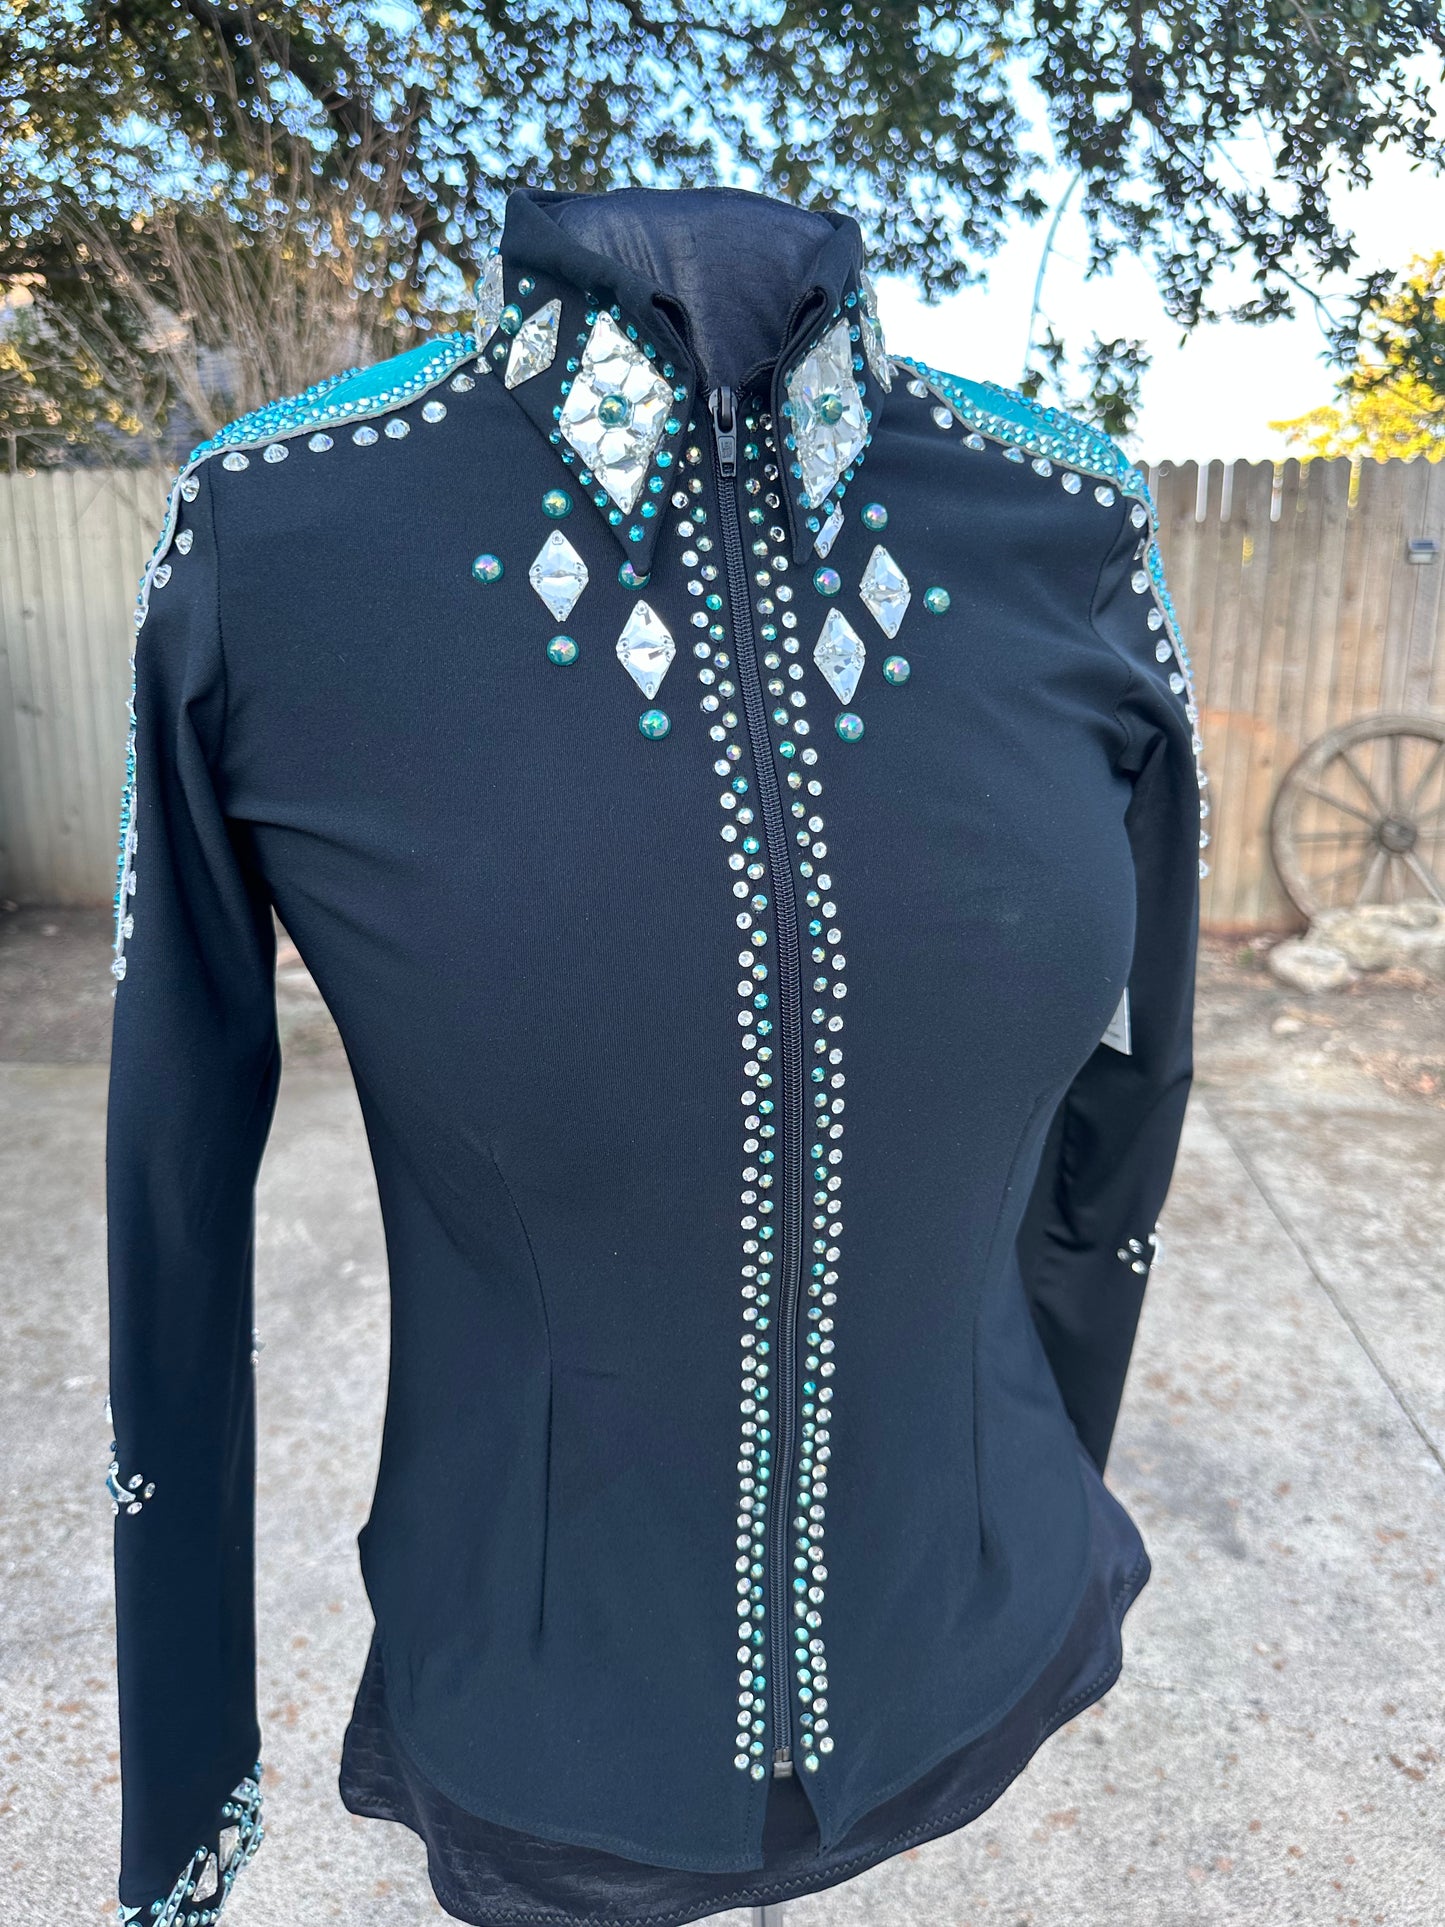 Size small day shirt black and light teals